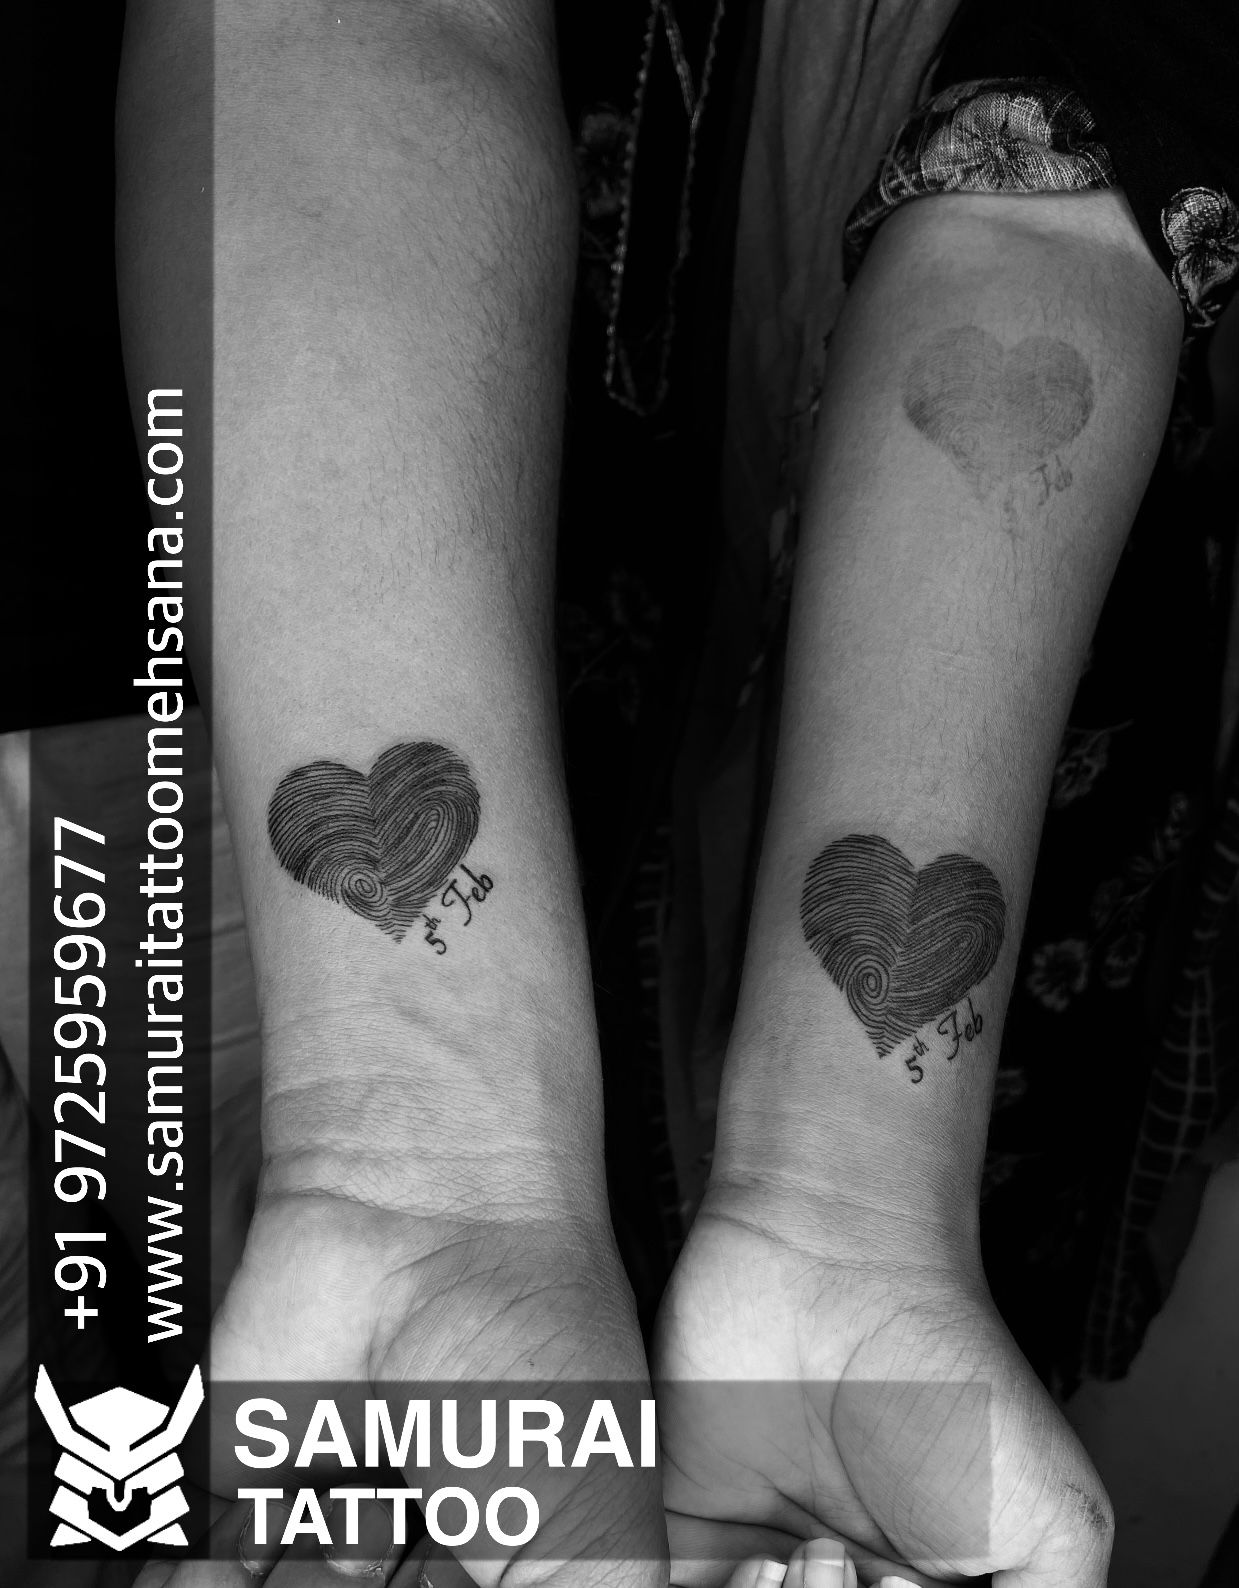 Tattoo uploaded by Ding Singh  Fingerprint Tattoos for Couples  Tattoodo